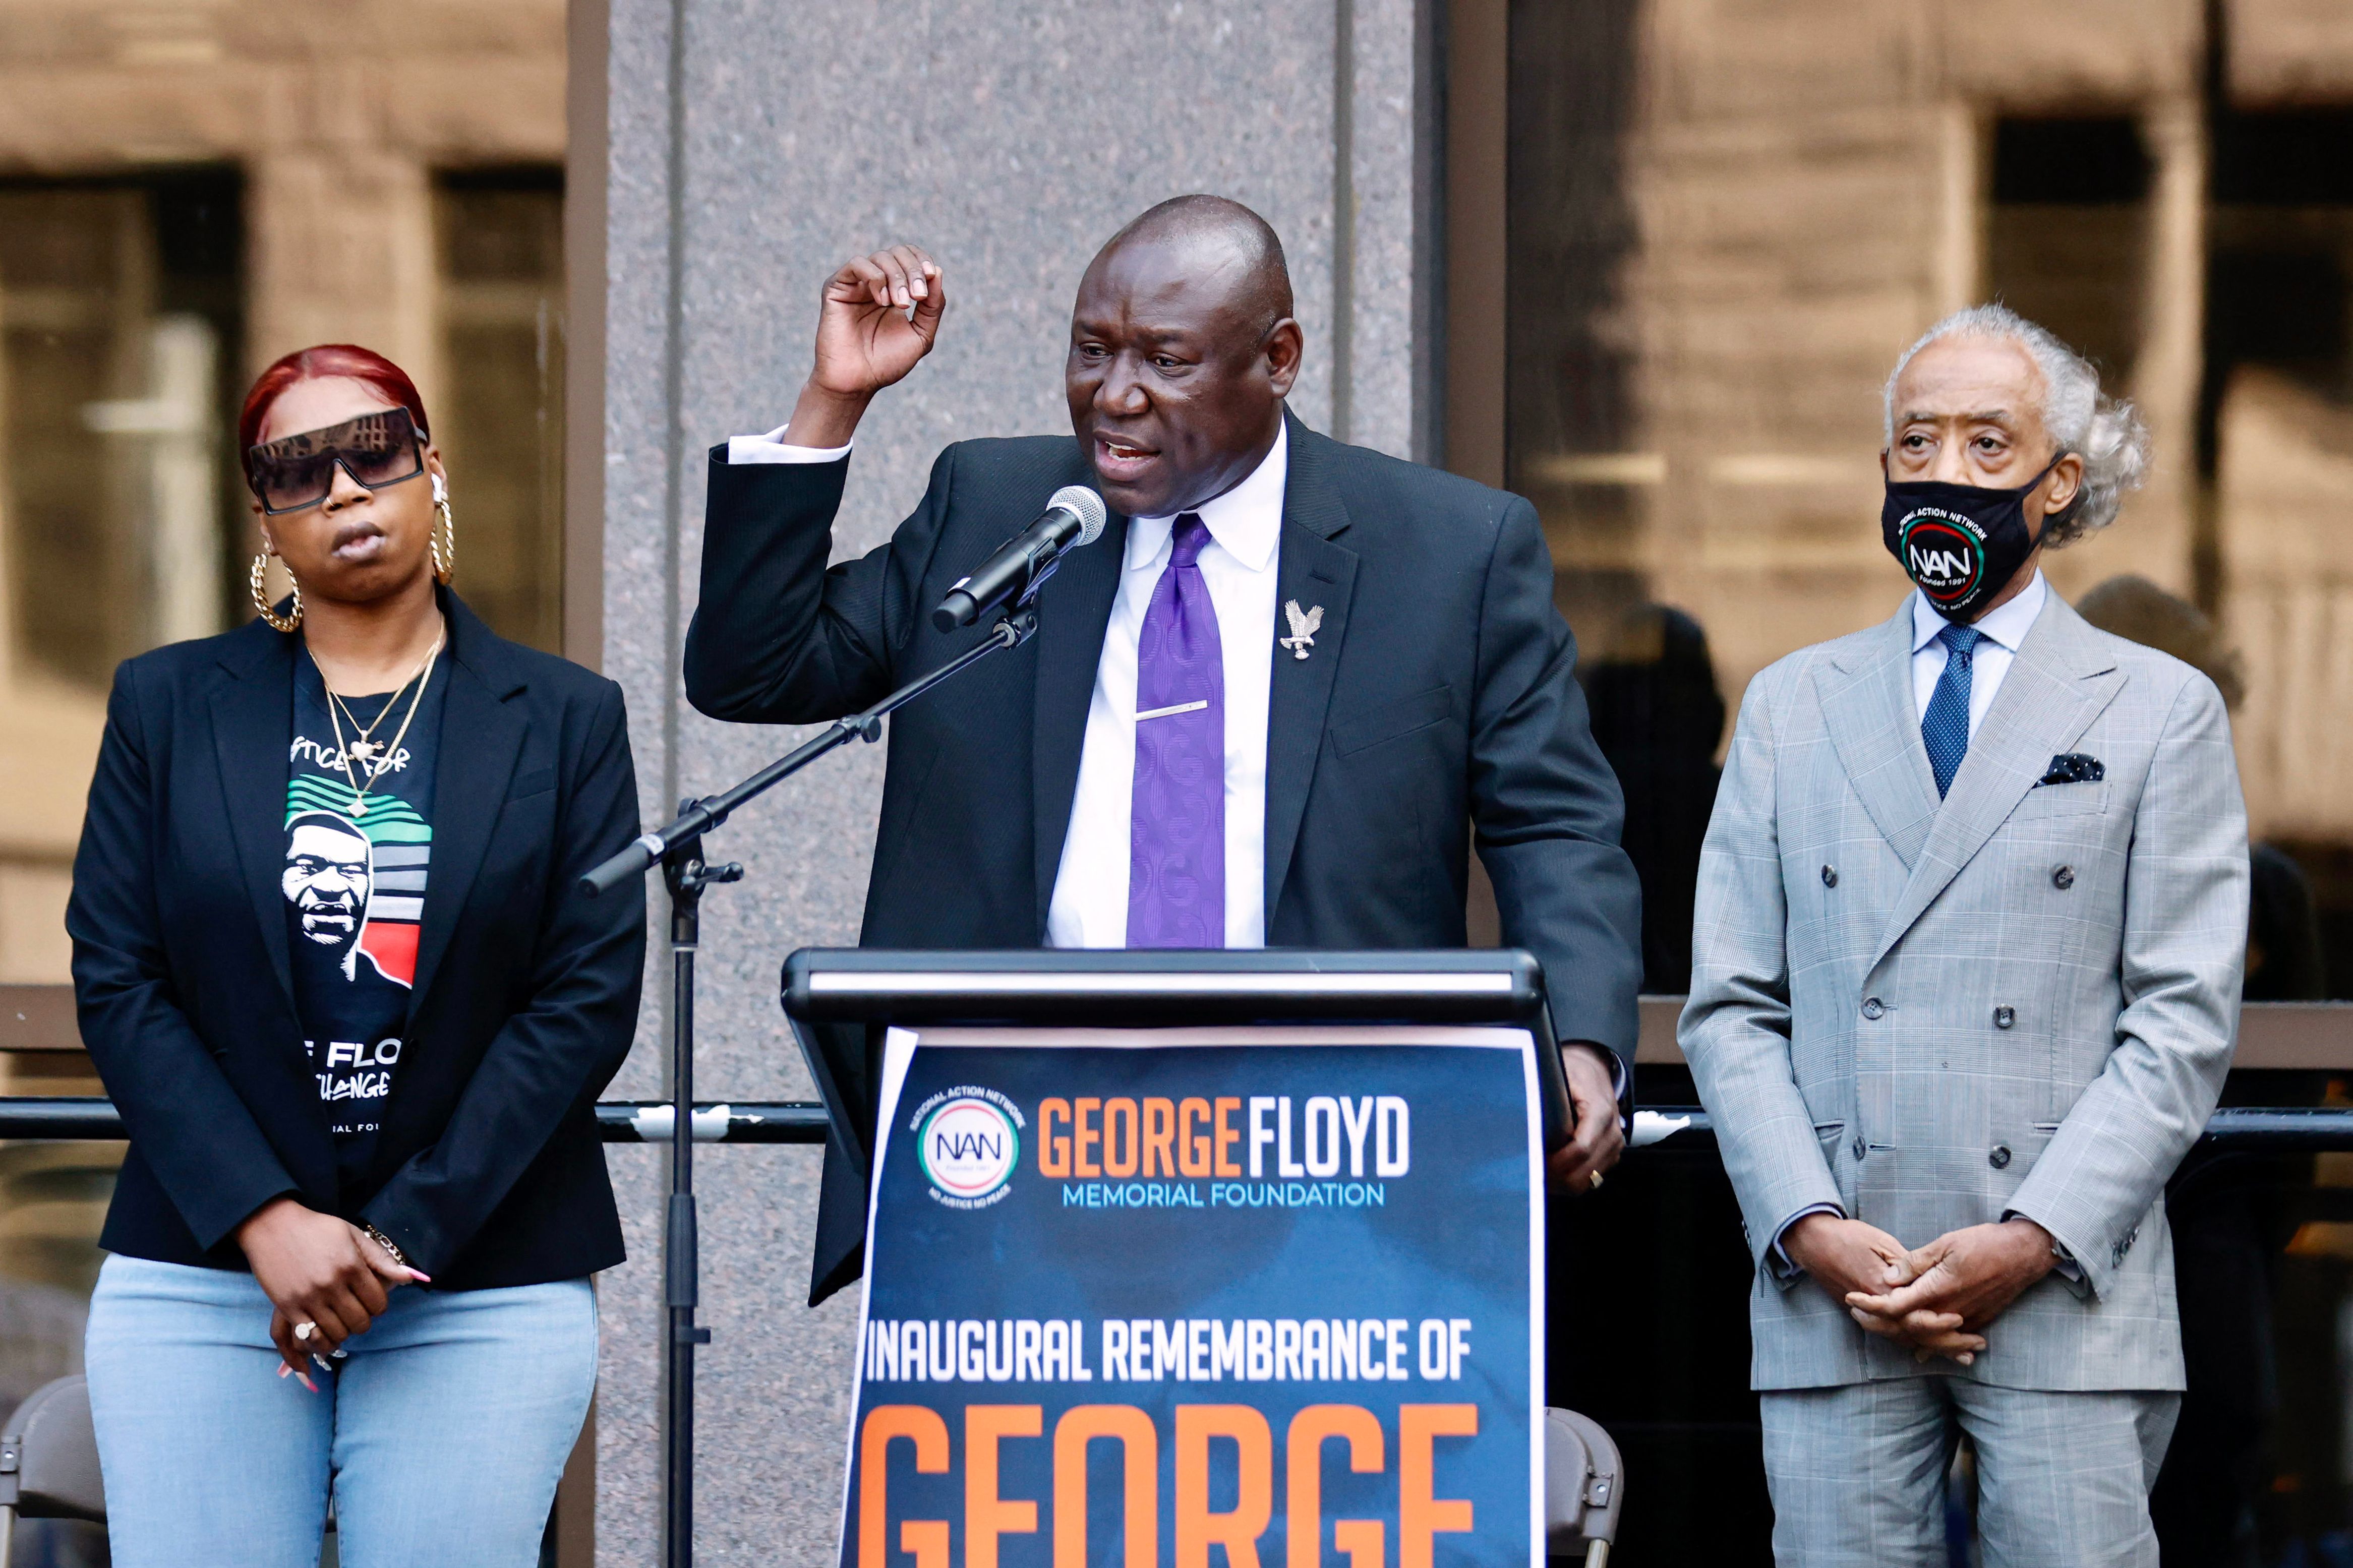 Attorney Ben Crump (C) speaks, flanked by Rev. Al Sharpton (R) and George Floyd's sister Bridgett Floyd, during a remembrance for George Floyd in Minneapolis, Minnesota, on May 23